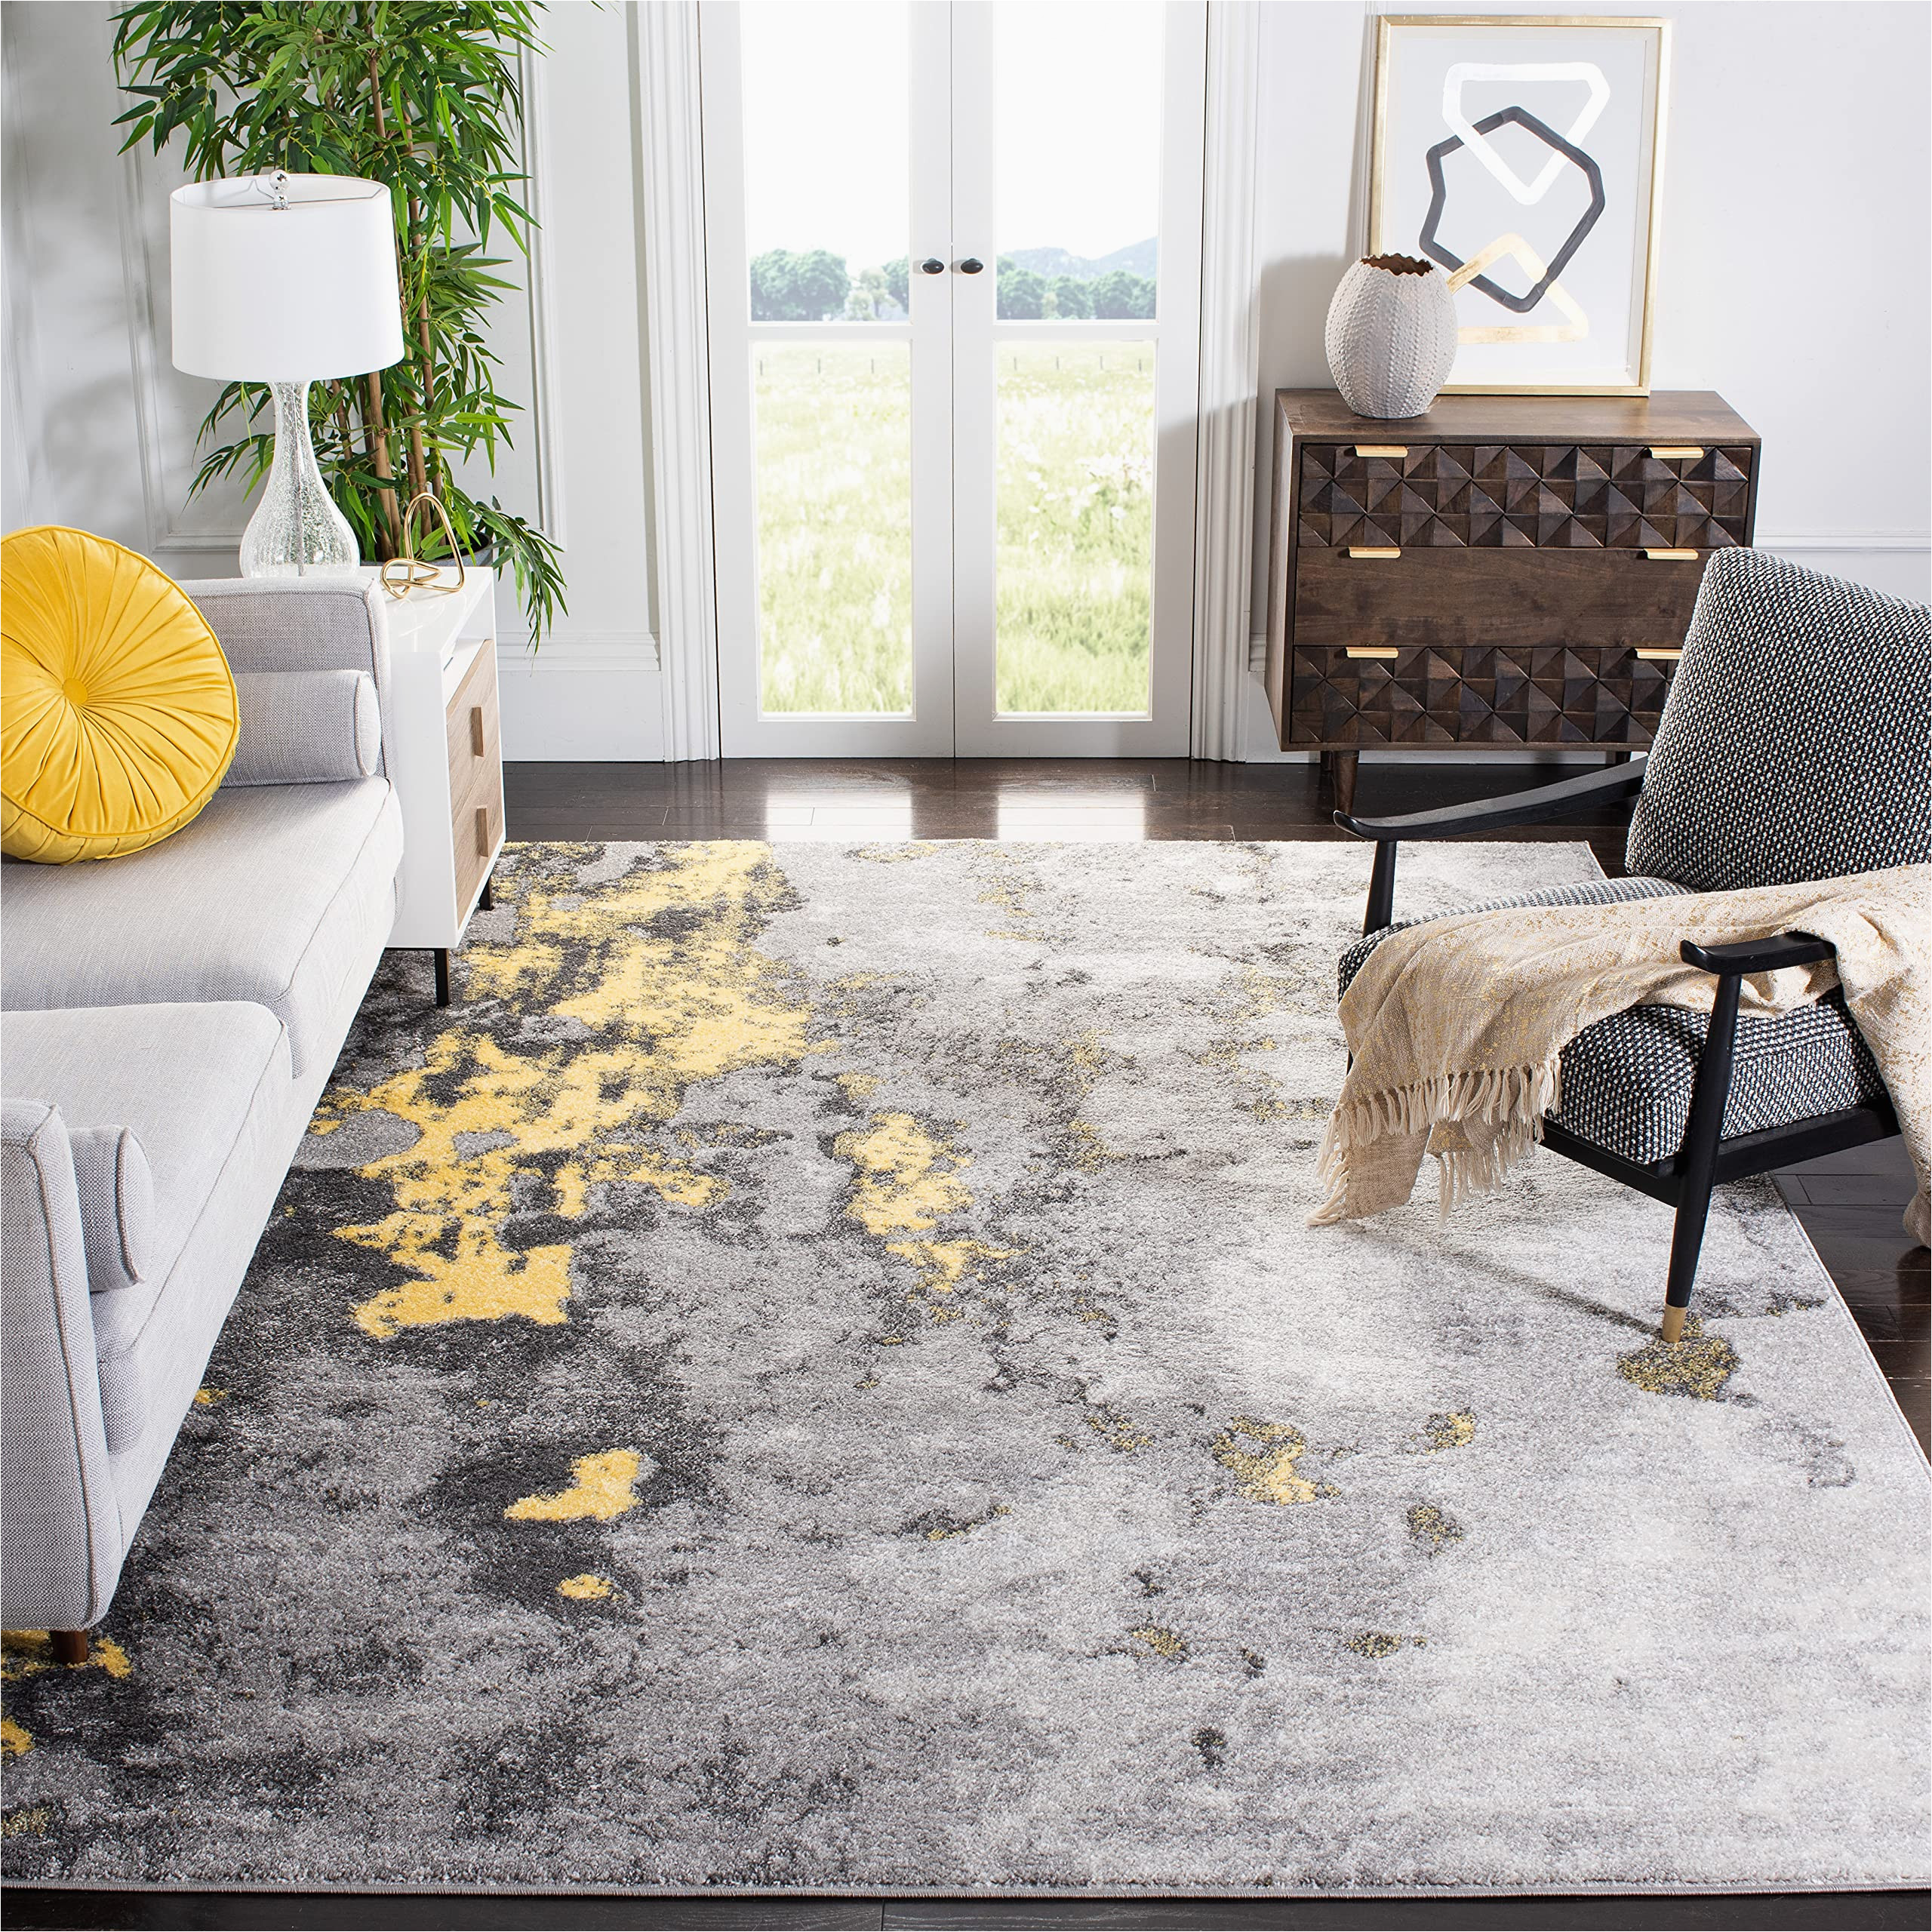 Grey and Yellow area Rug 8×10 Safavieh Adirondack Collection 8′ X 10′ Grey / Yellow Adr134h Modern Abstract Non-shedding Living Room Bedroom Dining Home Office area Rug